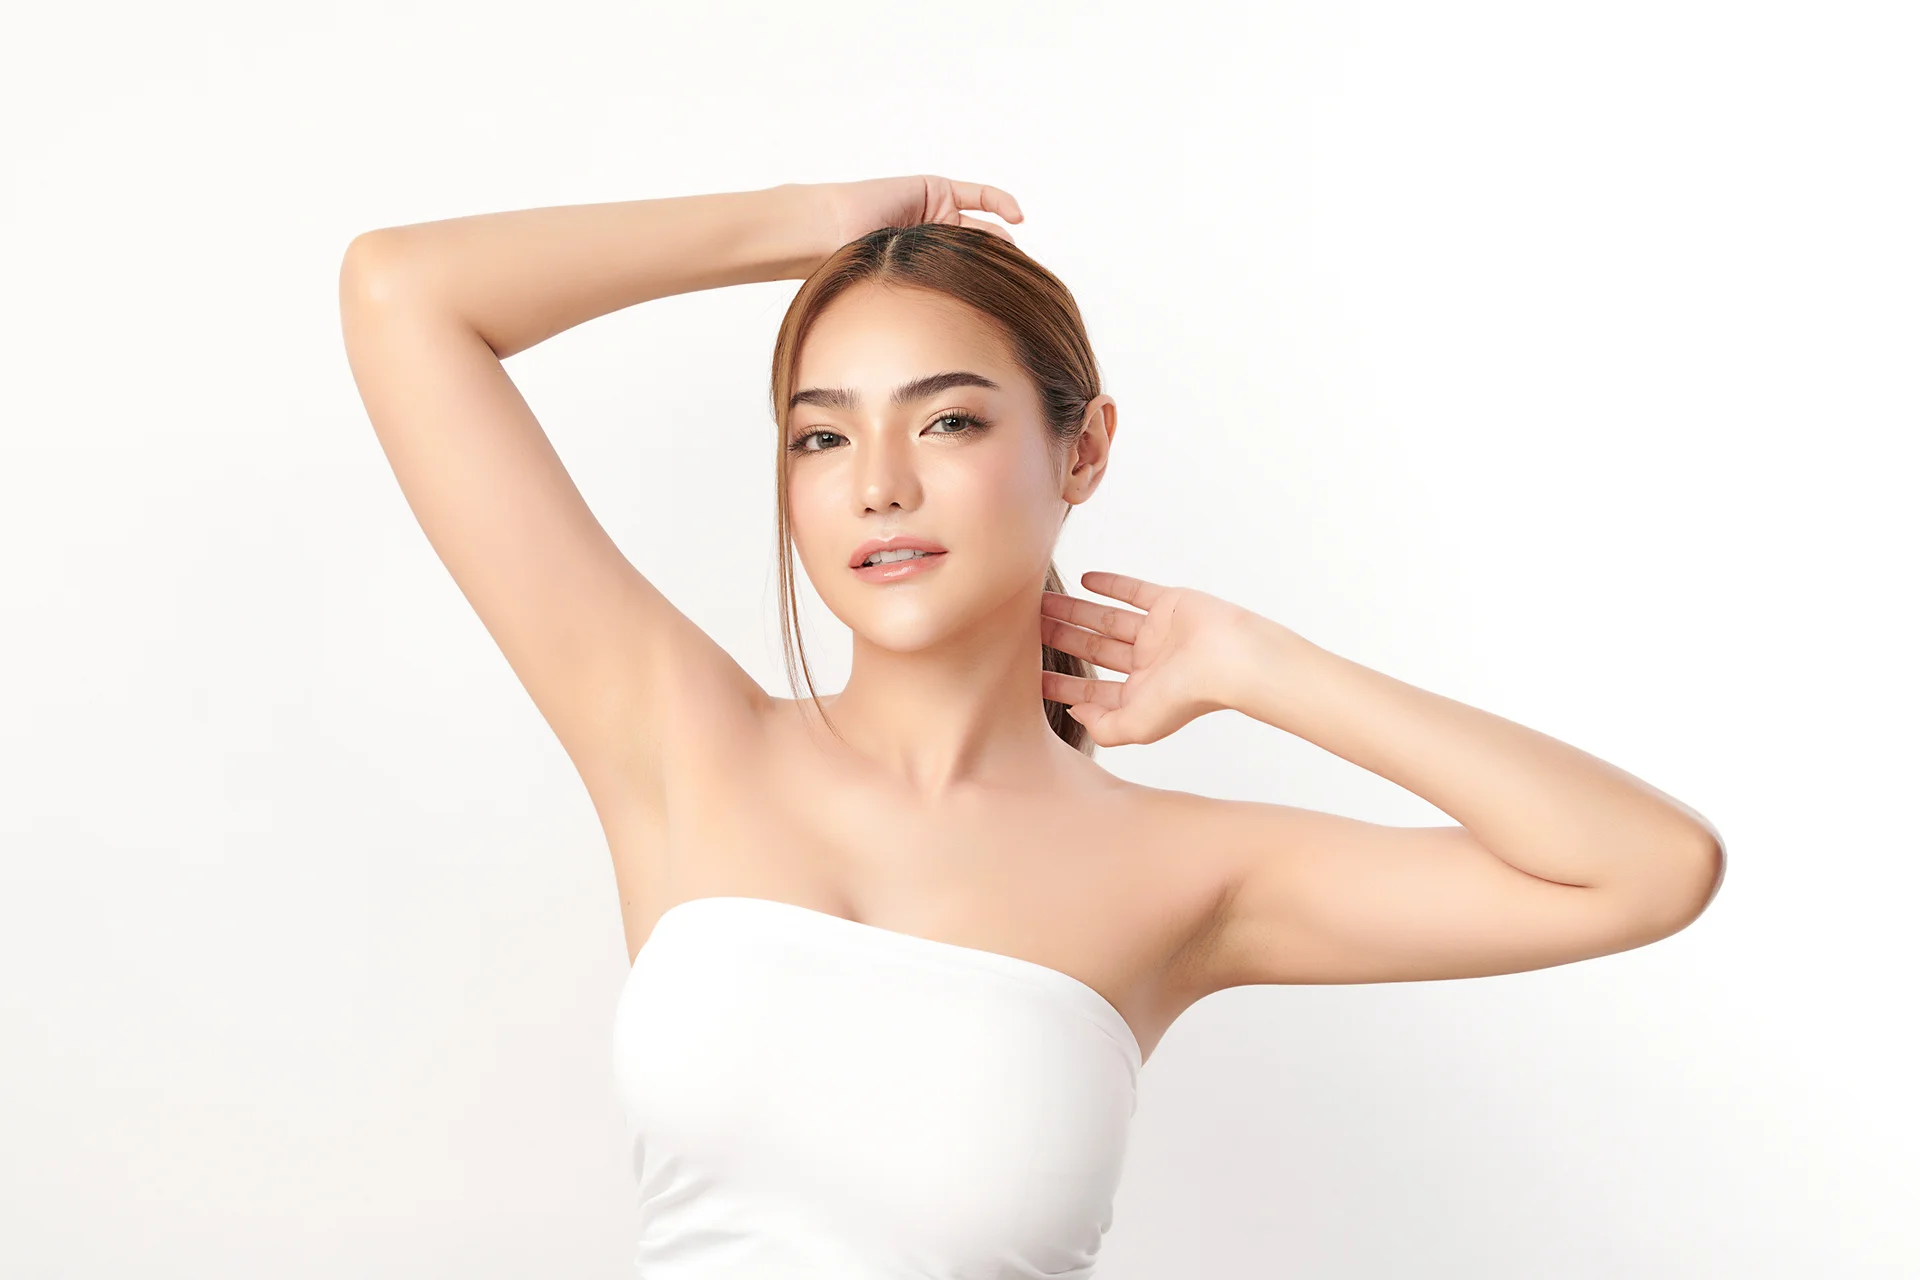 A woman in a white dress striking a pose for a photo, showcasing her precise arm fat removal achieved through VASER lipo arm lifts.